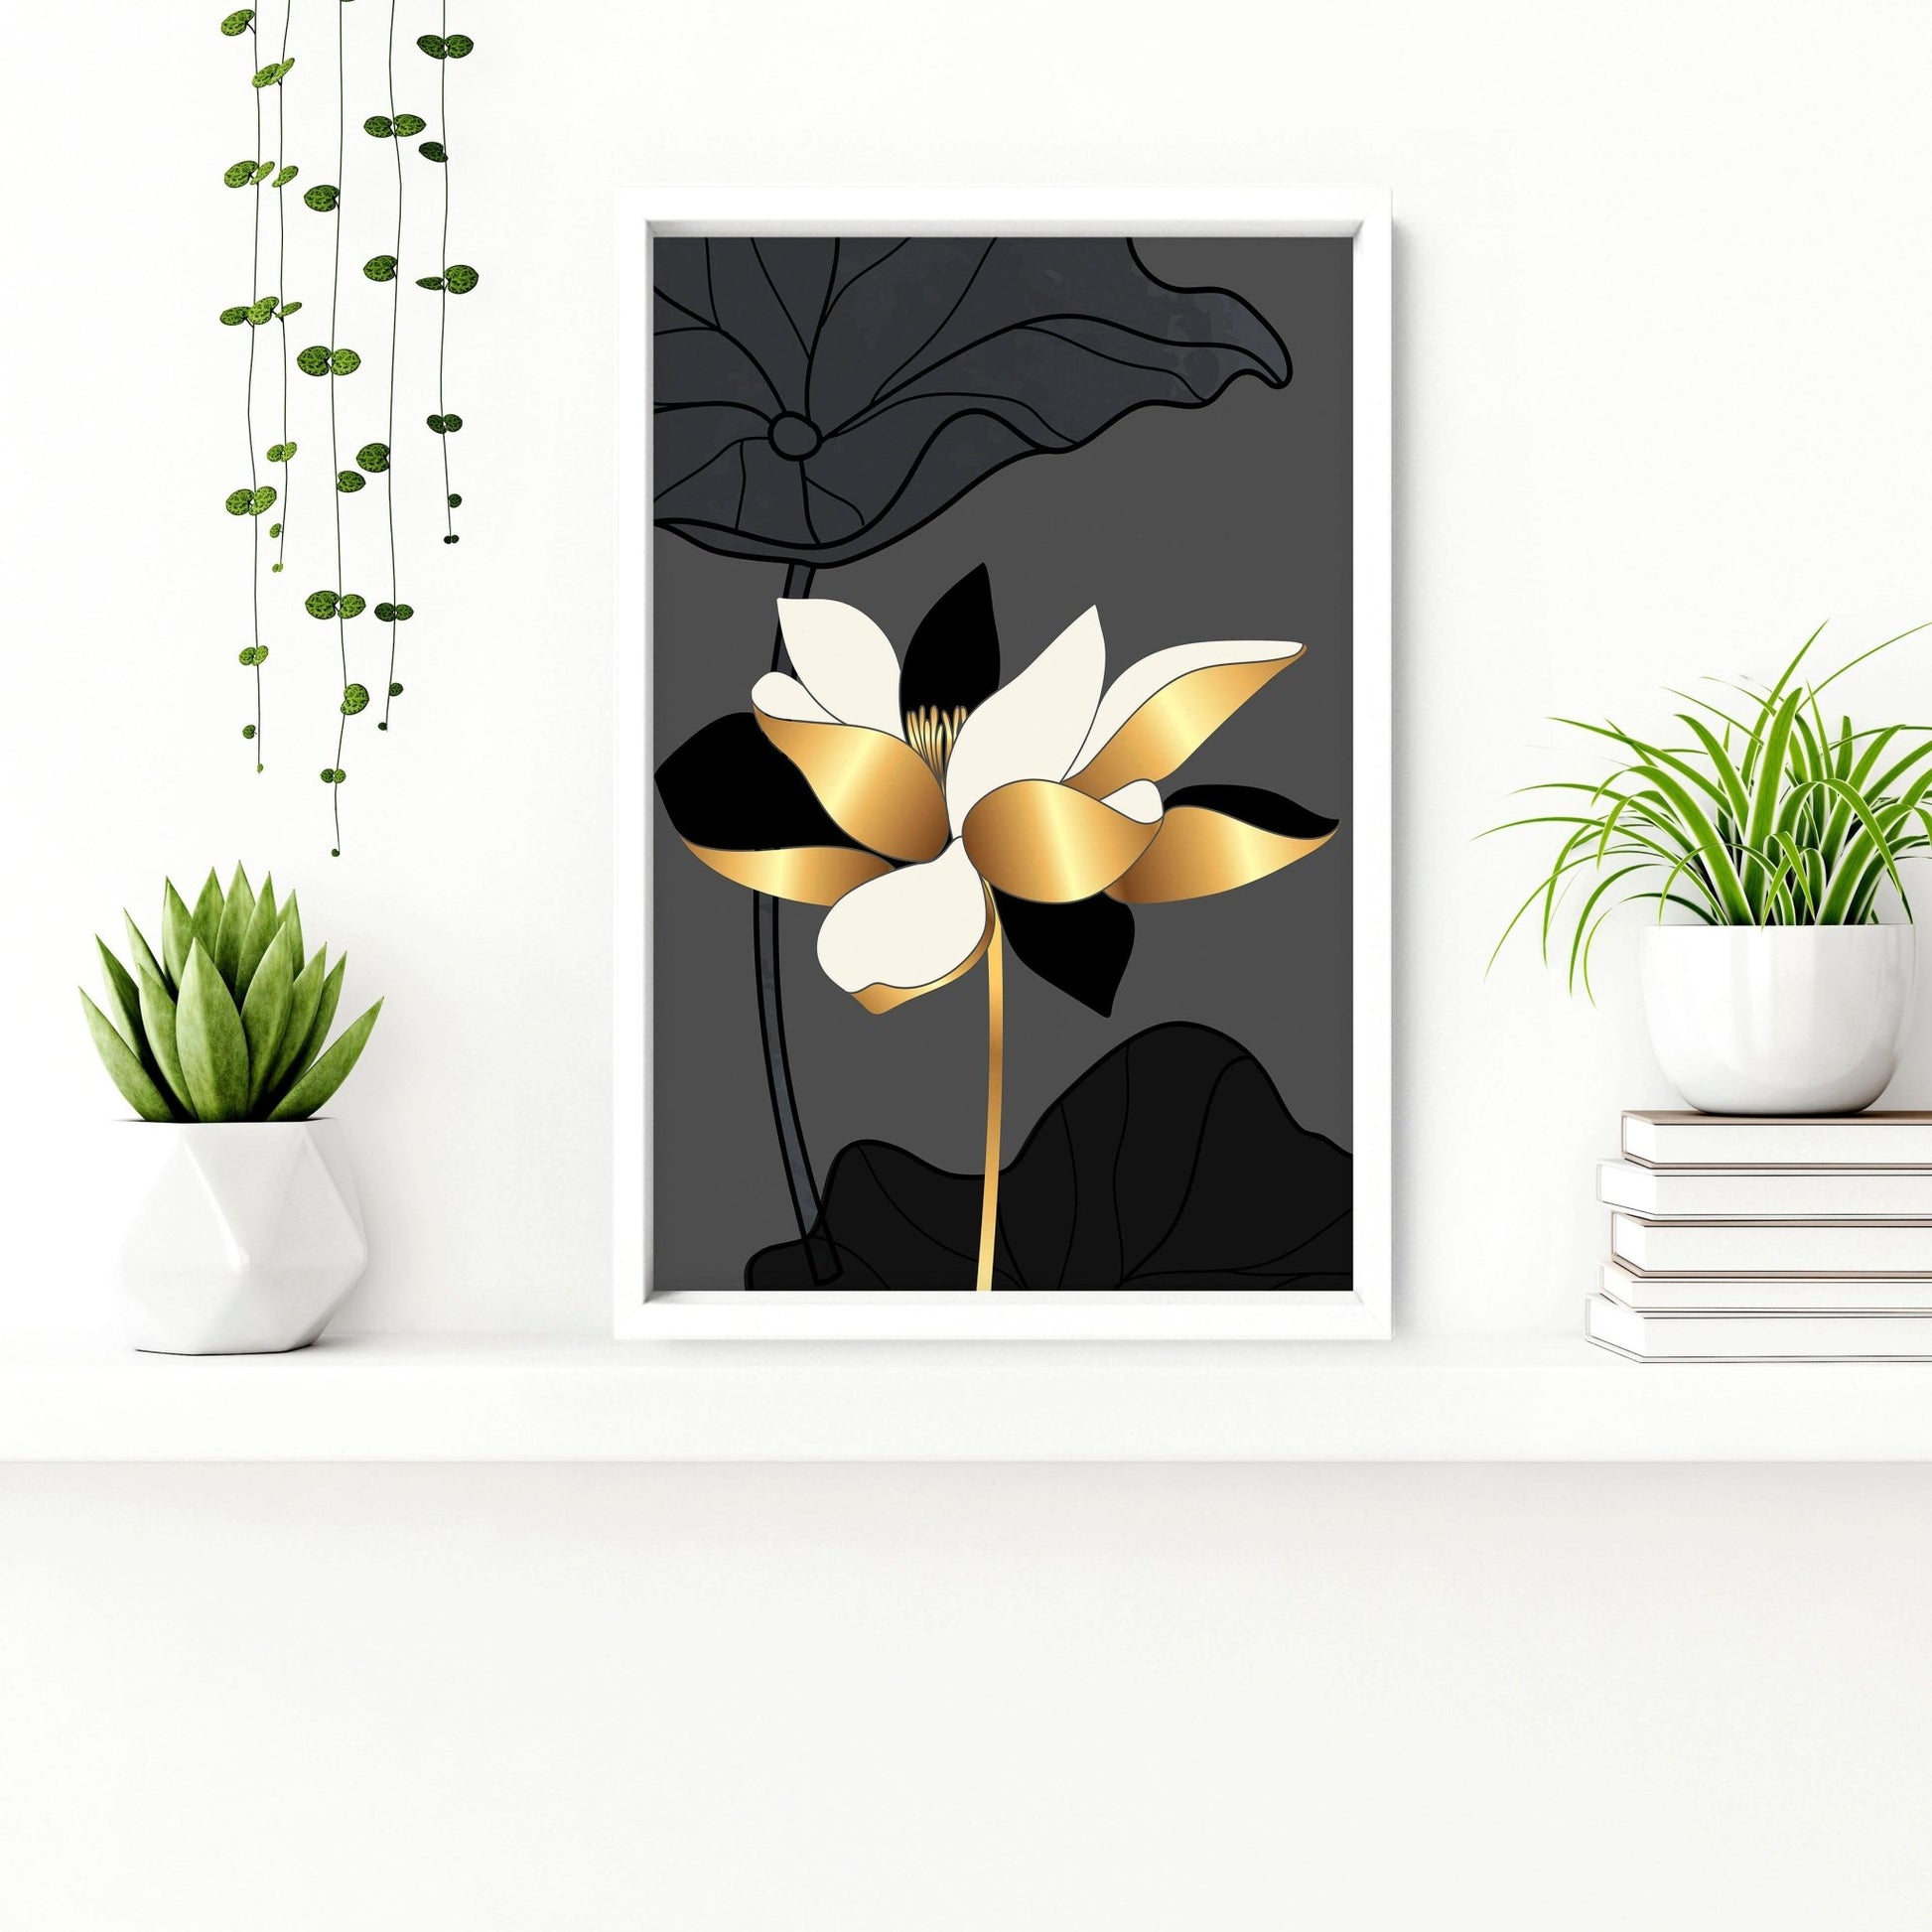 Eclectic Floral wall art for the bathroom | set of 3 wall art - About Wall Art